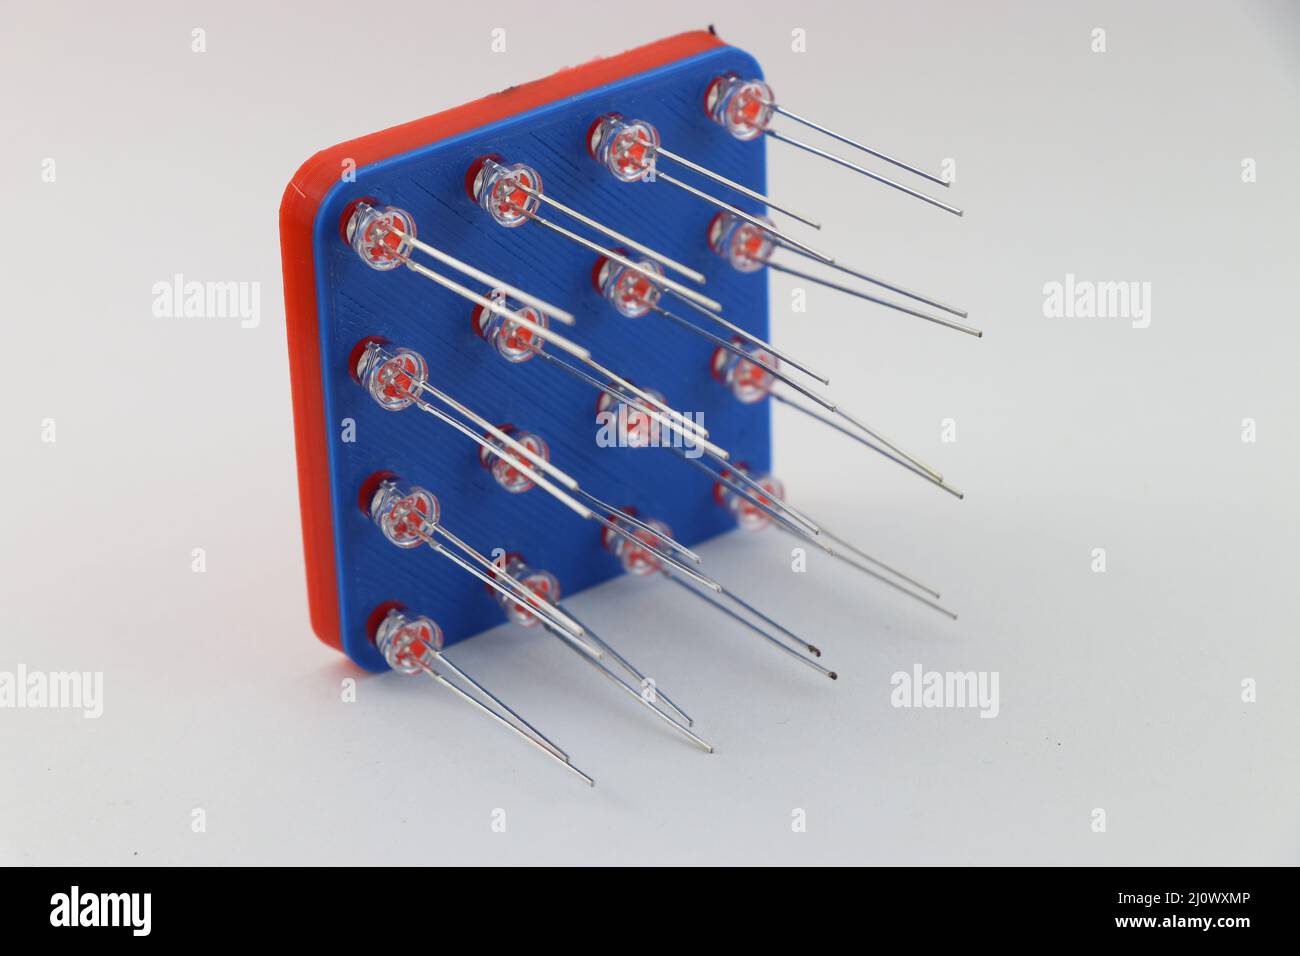 3D printed model of a 4X4 LED jig with light emitting diodes attached to its slots on a white background Stock Photo